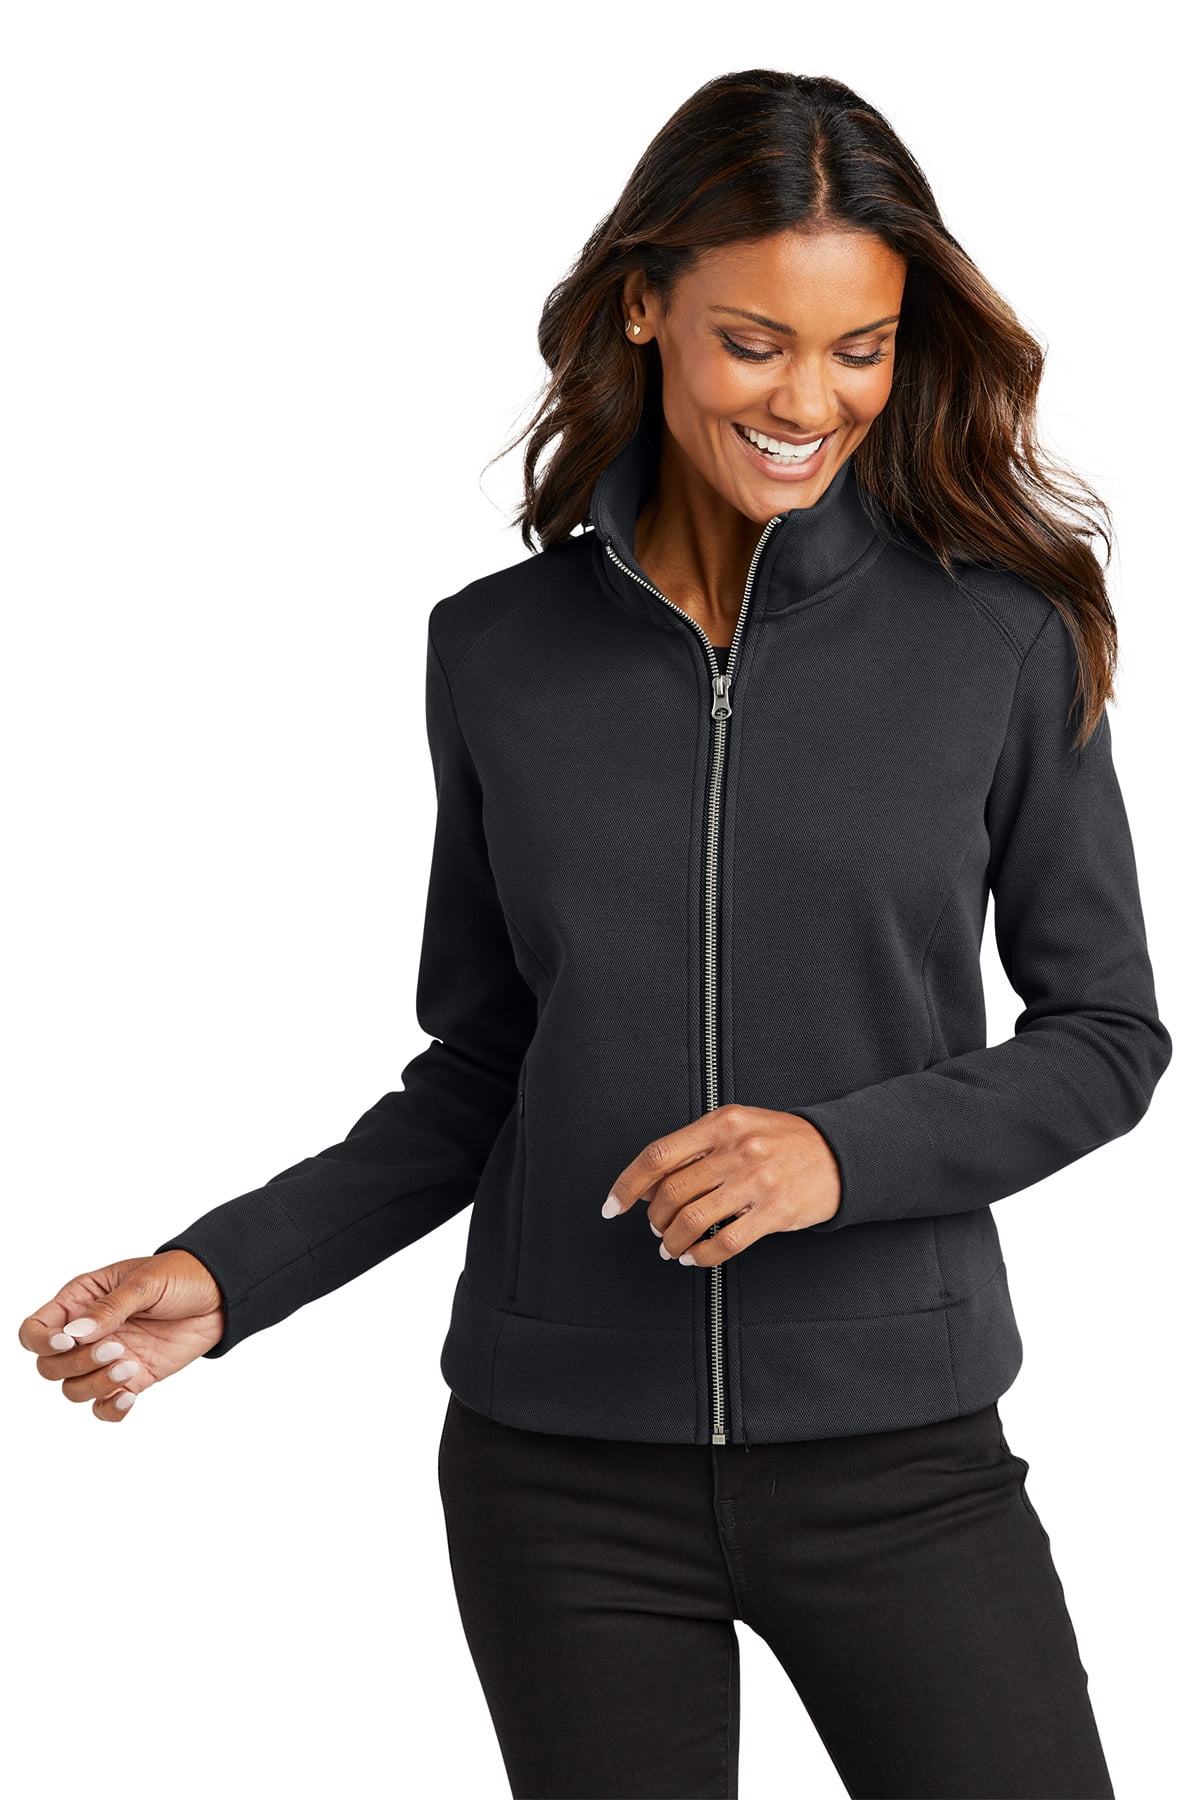 Avalanche Women's Fleece Lined Hoodie Soft Shell Jacket With Zipper Pockets  